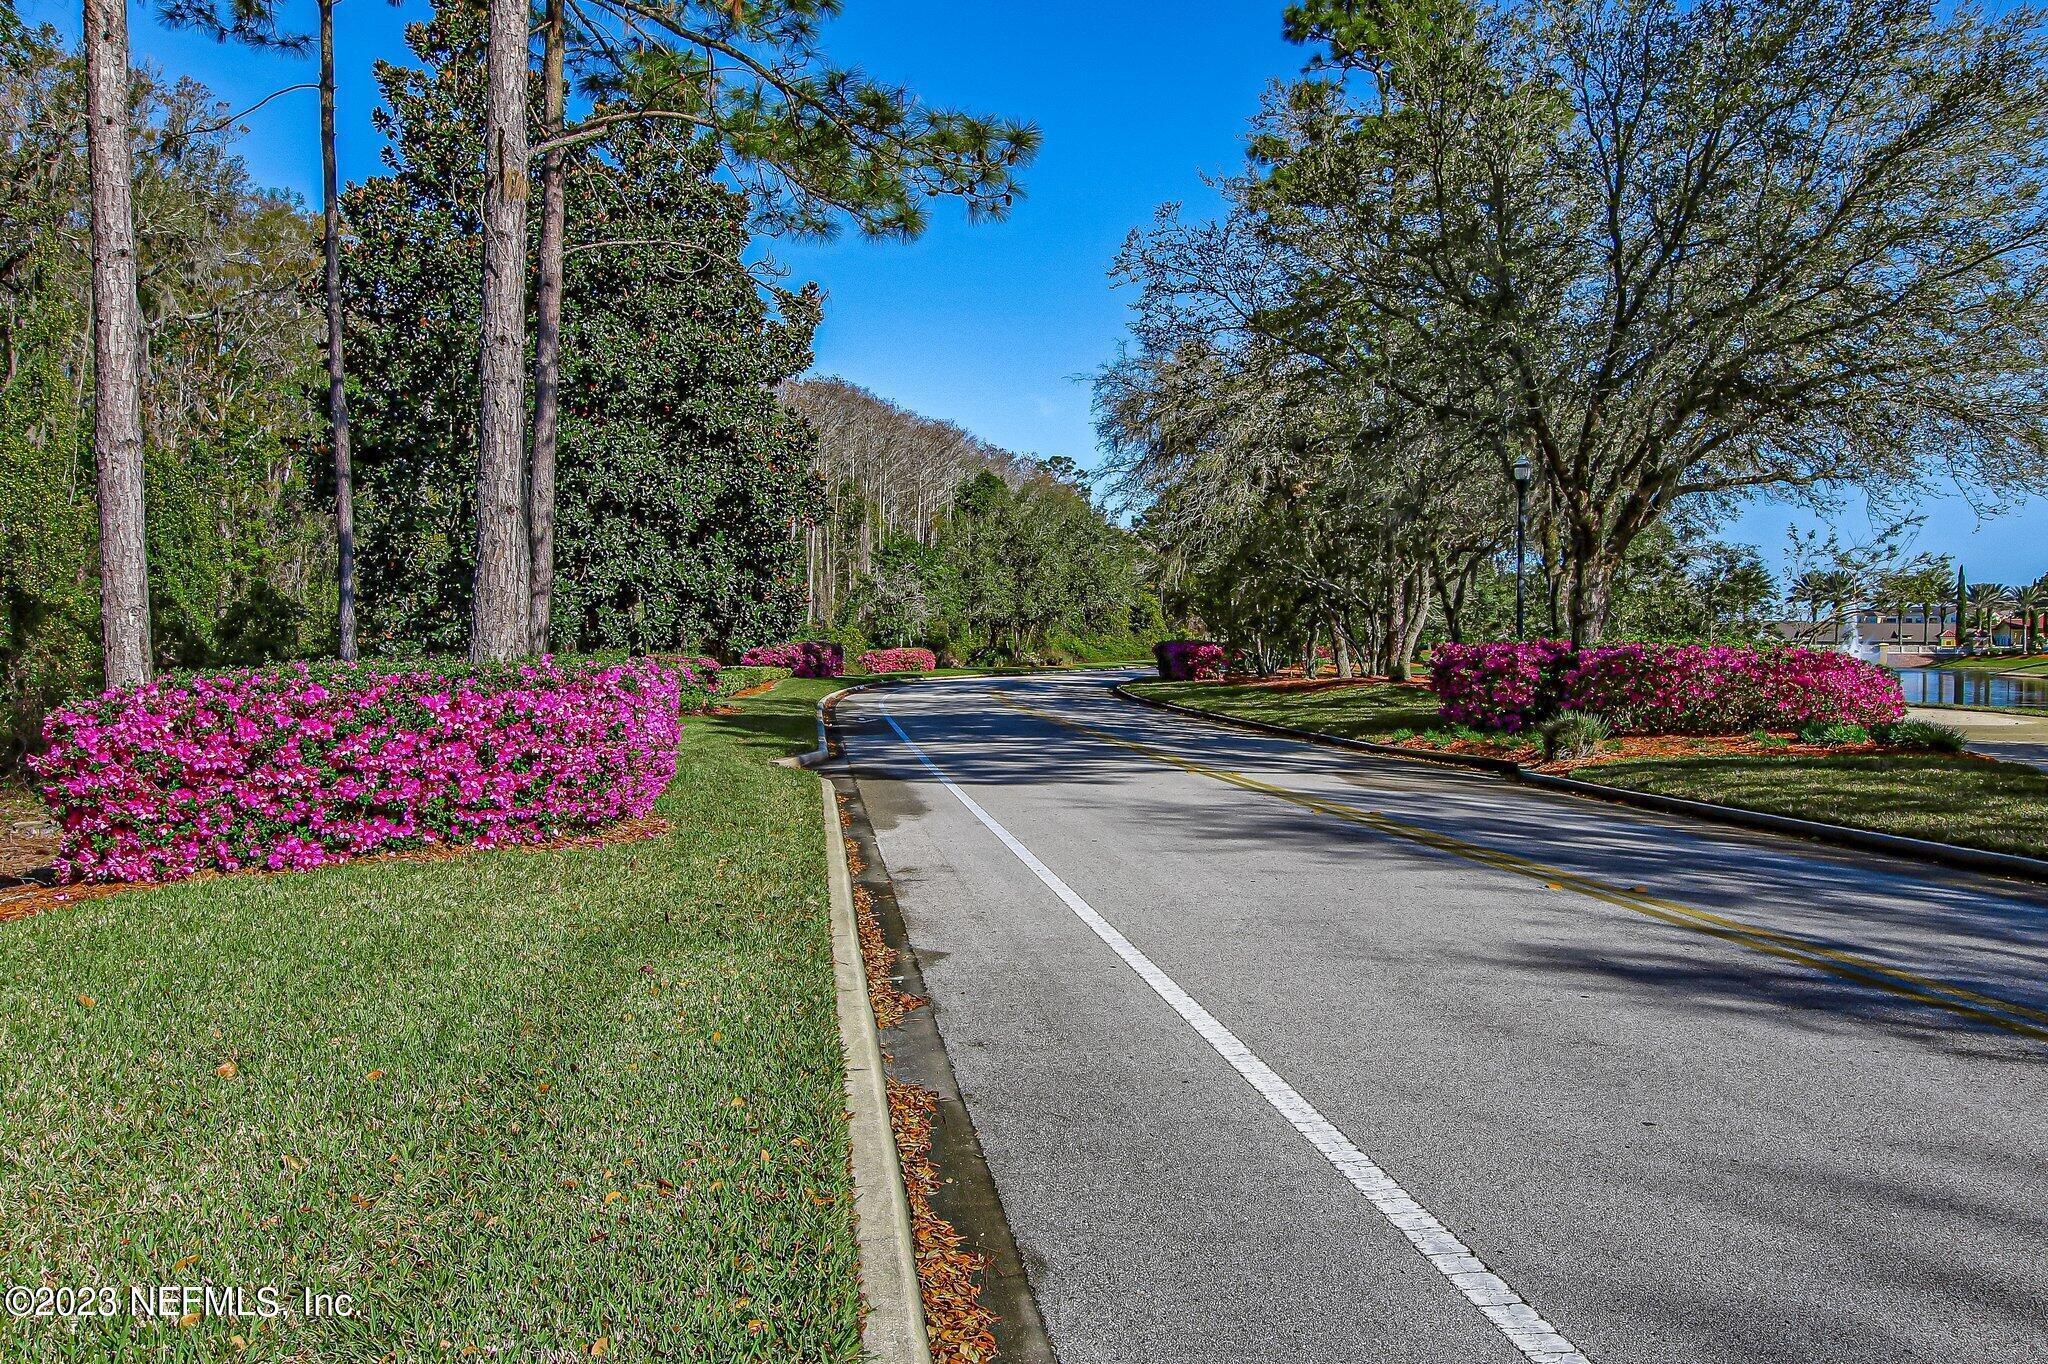 Sweetwater Main Road with Azaleas Blooming